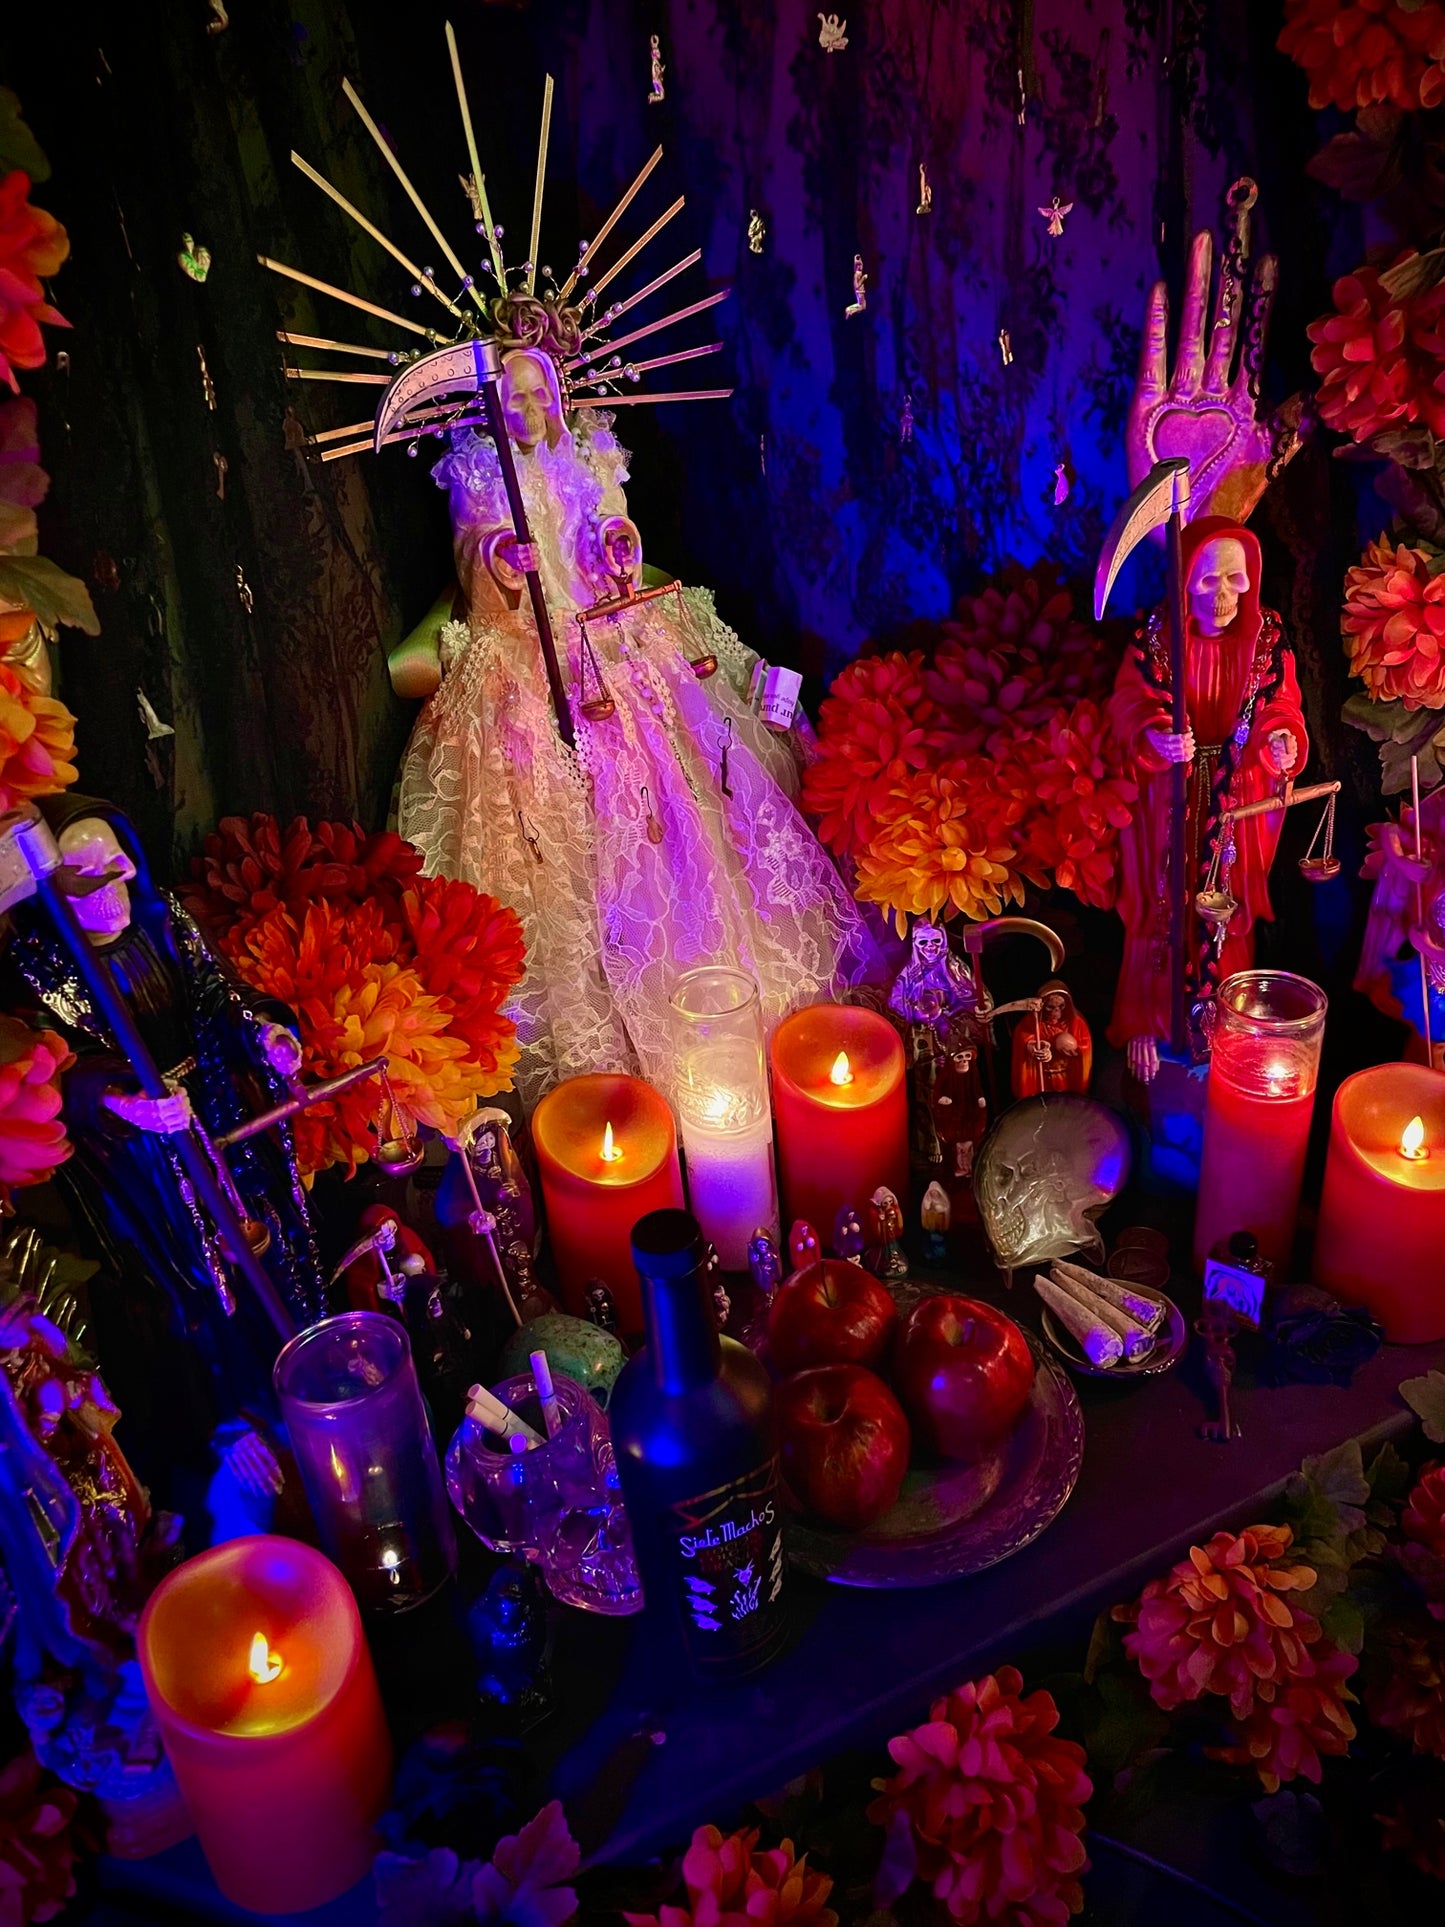 Petition and Offering to Santa Muerte